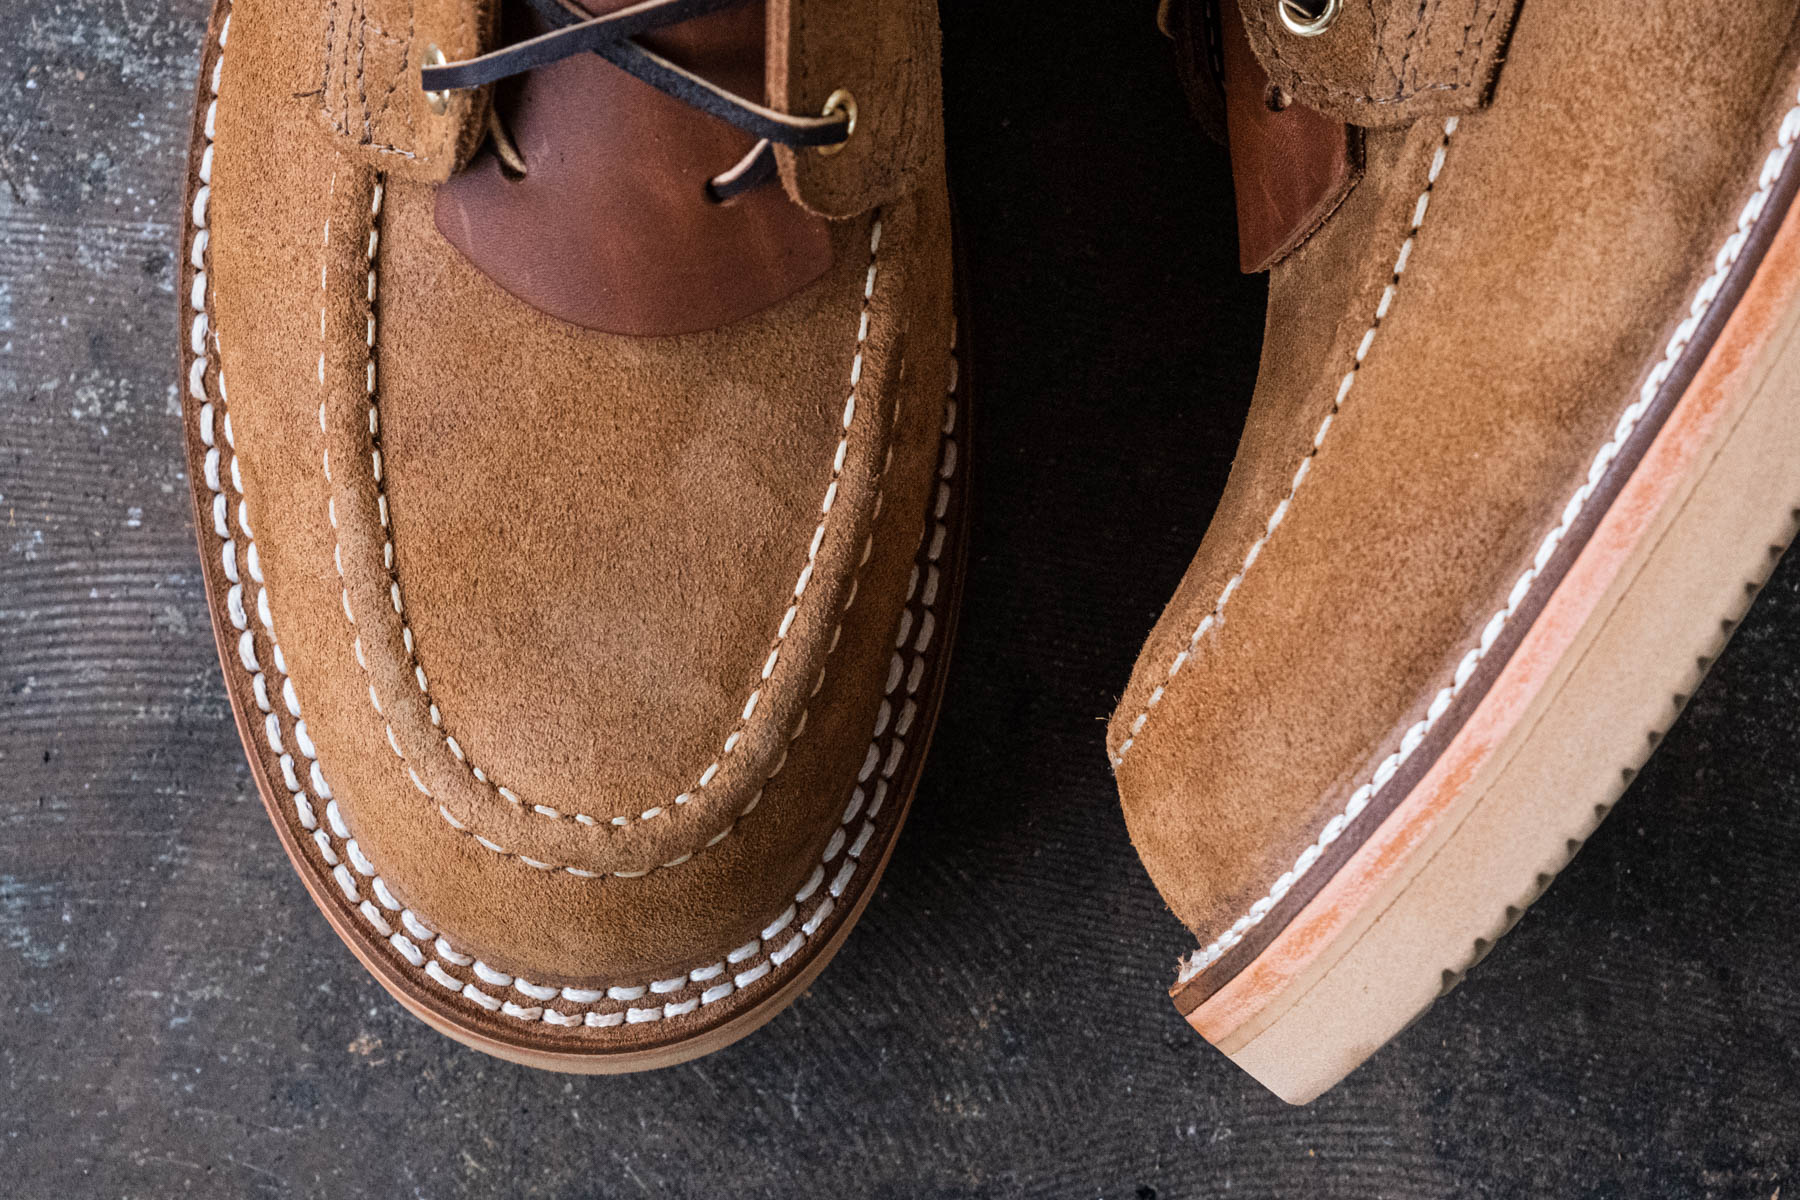 Nicks 1964 brown roughout boot with a moc toe. Nicks moc toe is built to last